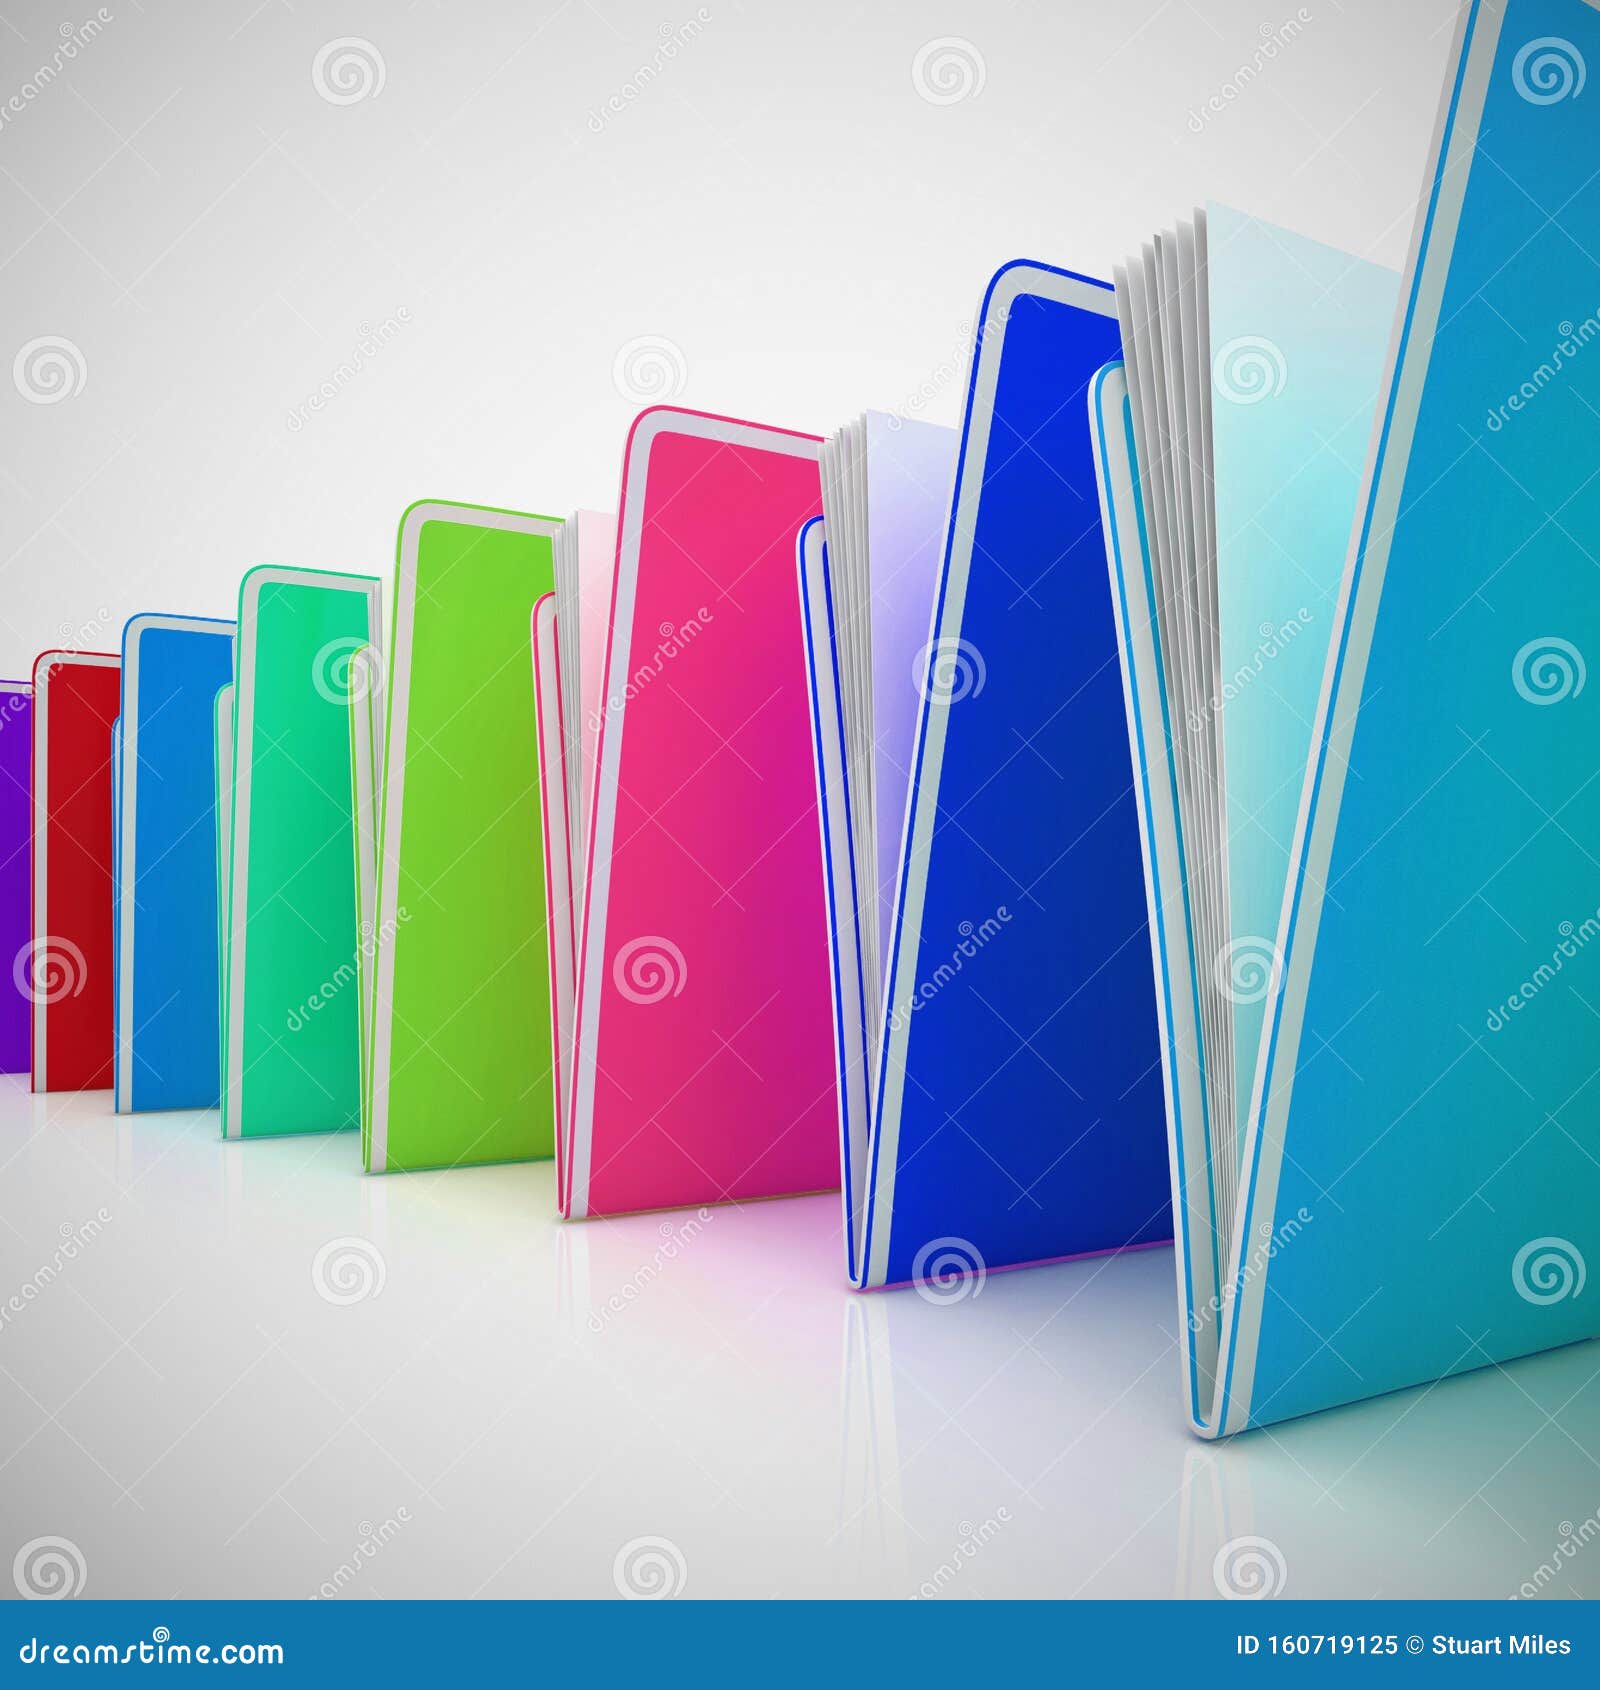 files of folders concept icon shows data records for filing and record keeping - 3d 